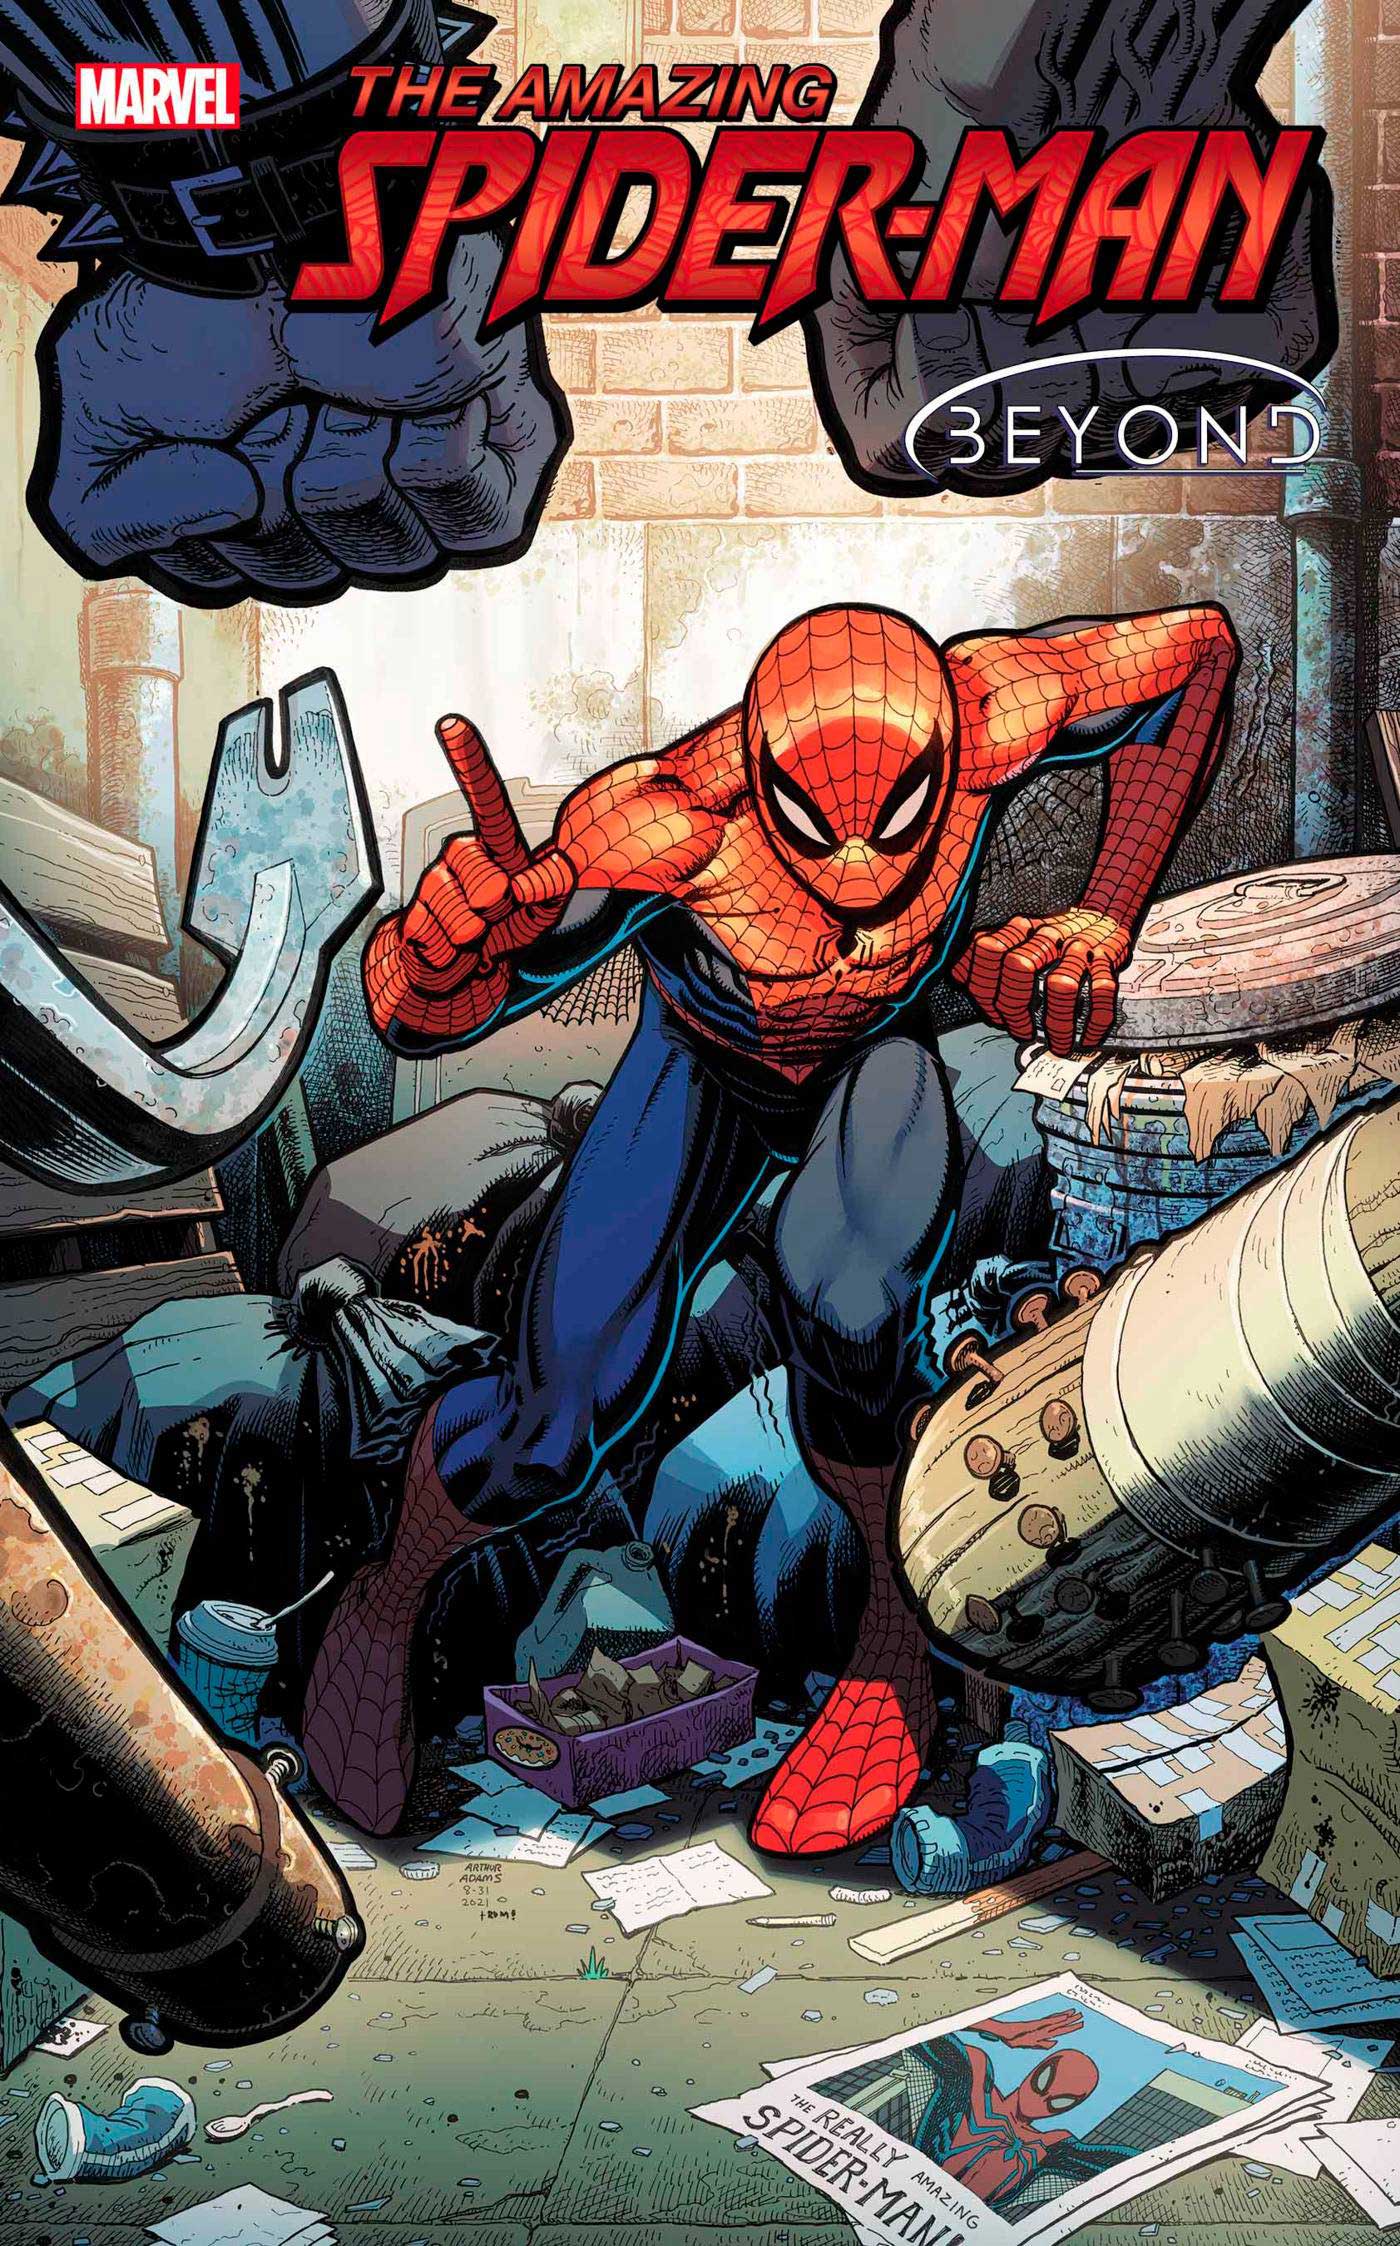 PREVIEW: Amazing Spider-Man #39 — Major Spoilers — Comic Book Reviews,  News, Previews, and Podcasts